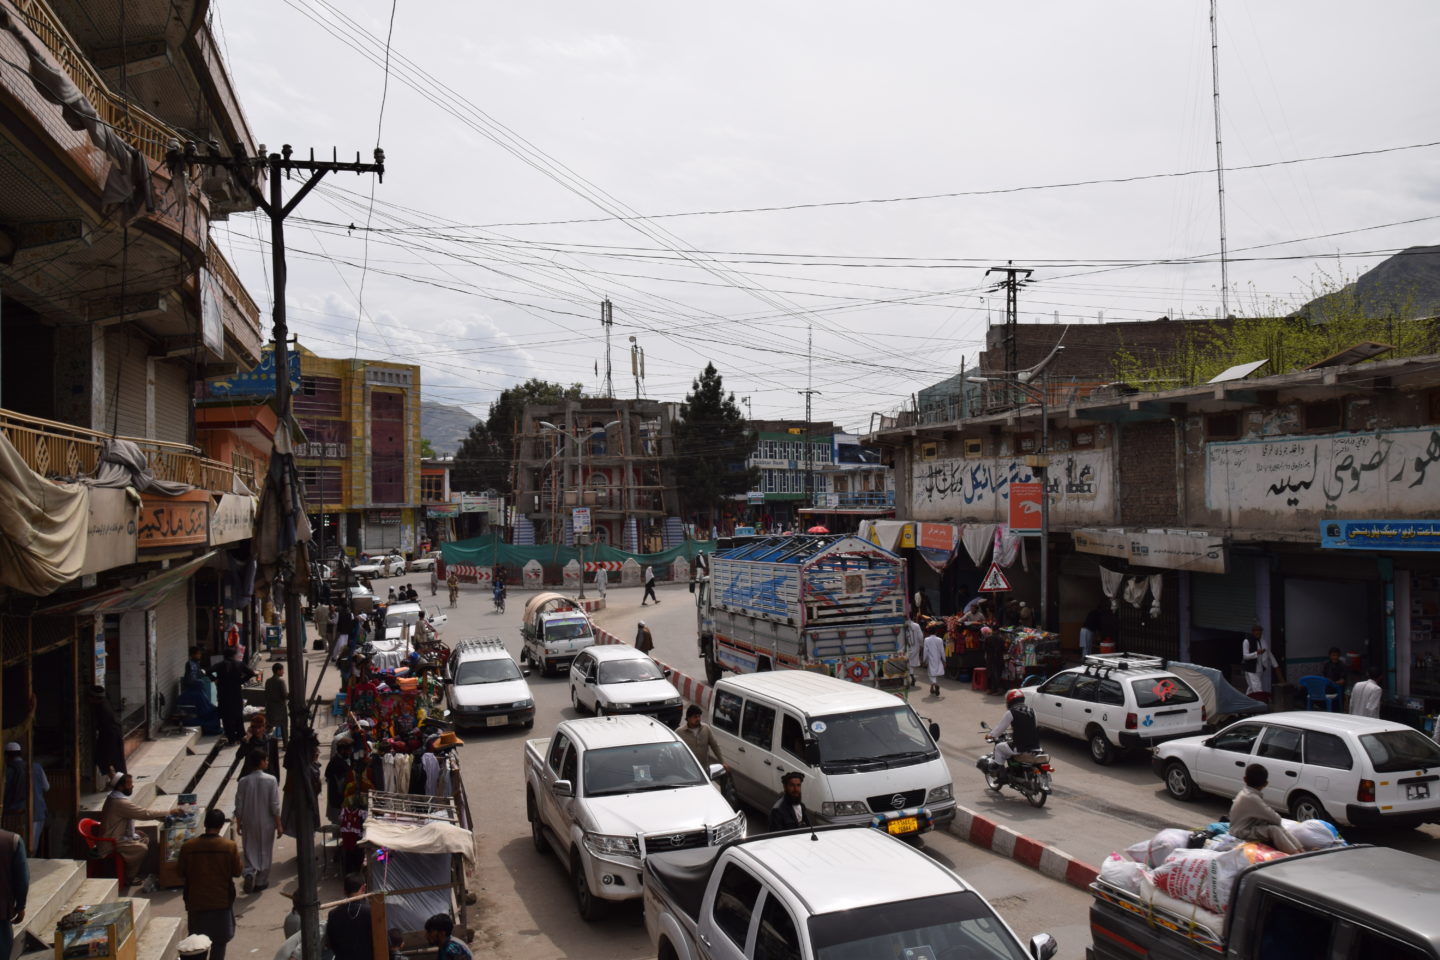 Centre of Asadabad, capital of the province of Kunar, Afghanistan